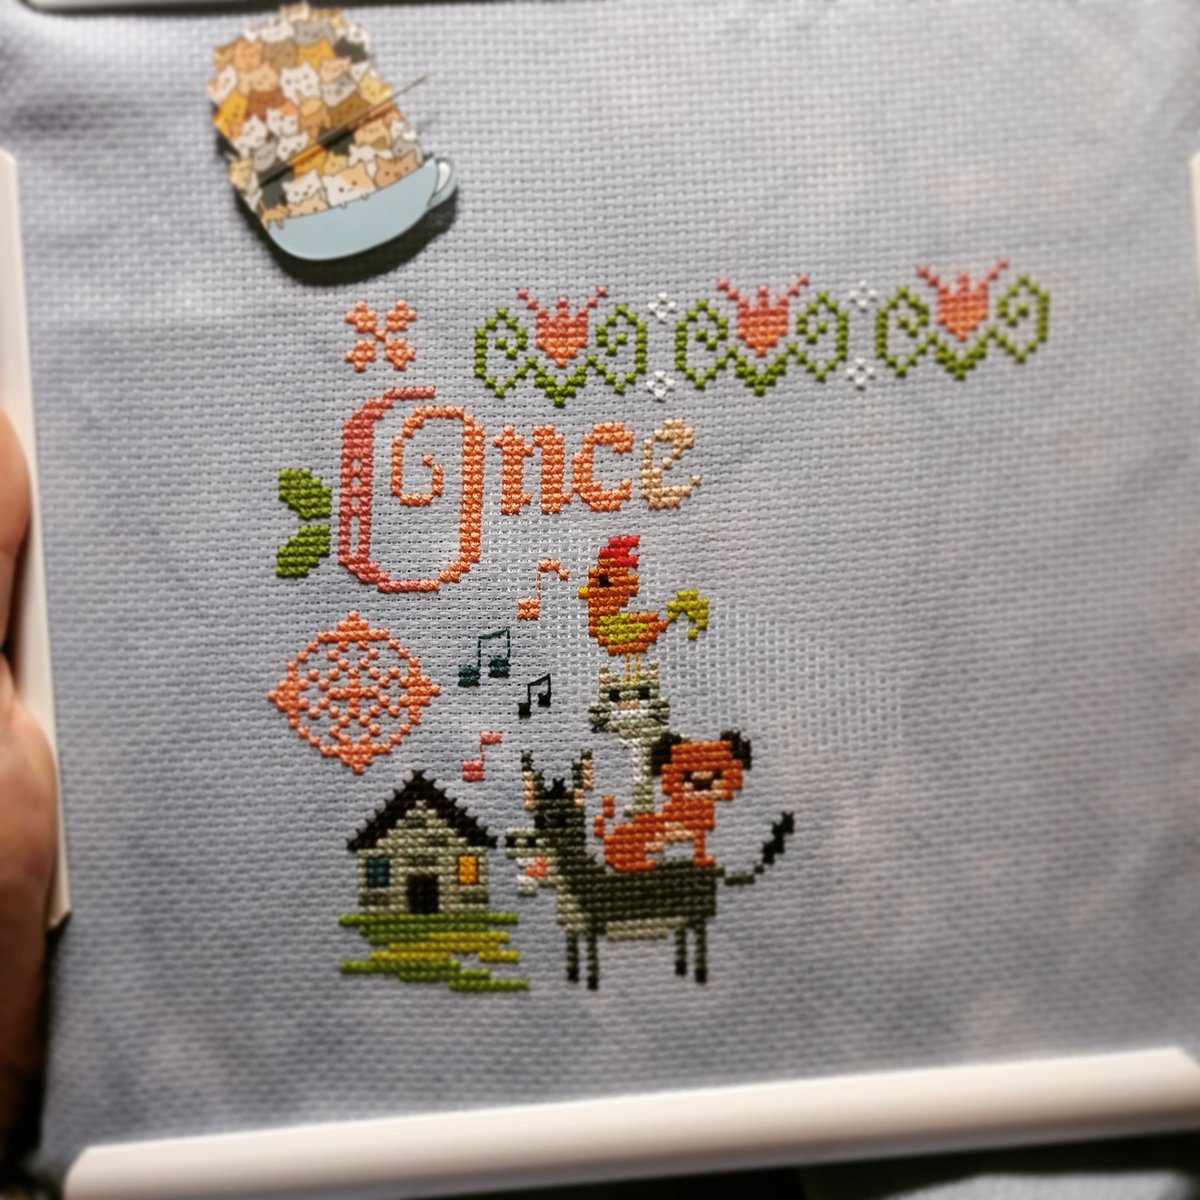 Month 1 of 12 of the Clouds Factory Grimm's fairy tales SAL--the Bremen Town Musicians. 
.
.
#cloudsfactory #cfgrimmsfairytales #cloudsfactorysal #xstitch #crossstitch #grimmsfairytales #brementownmusicians